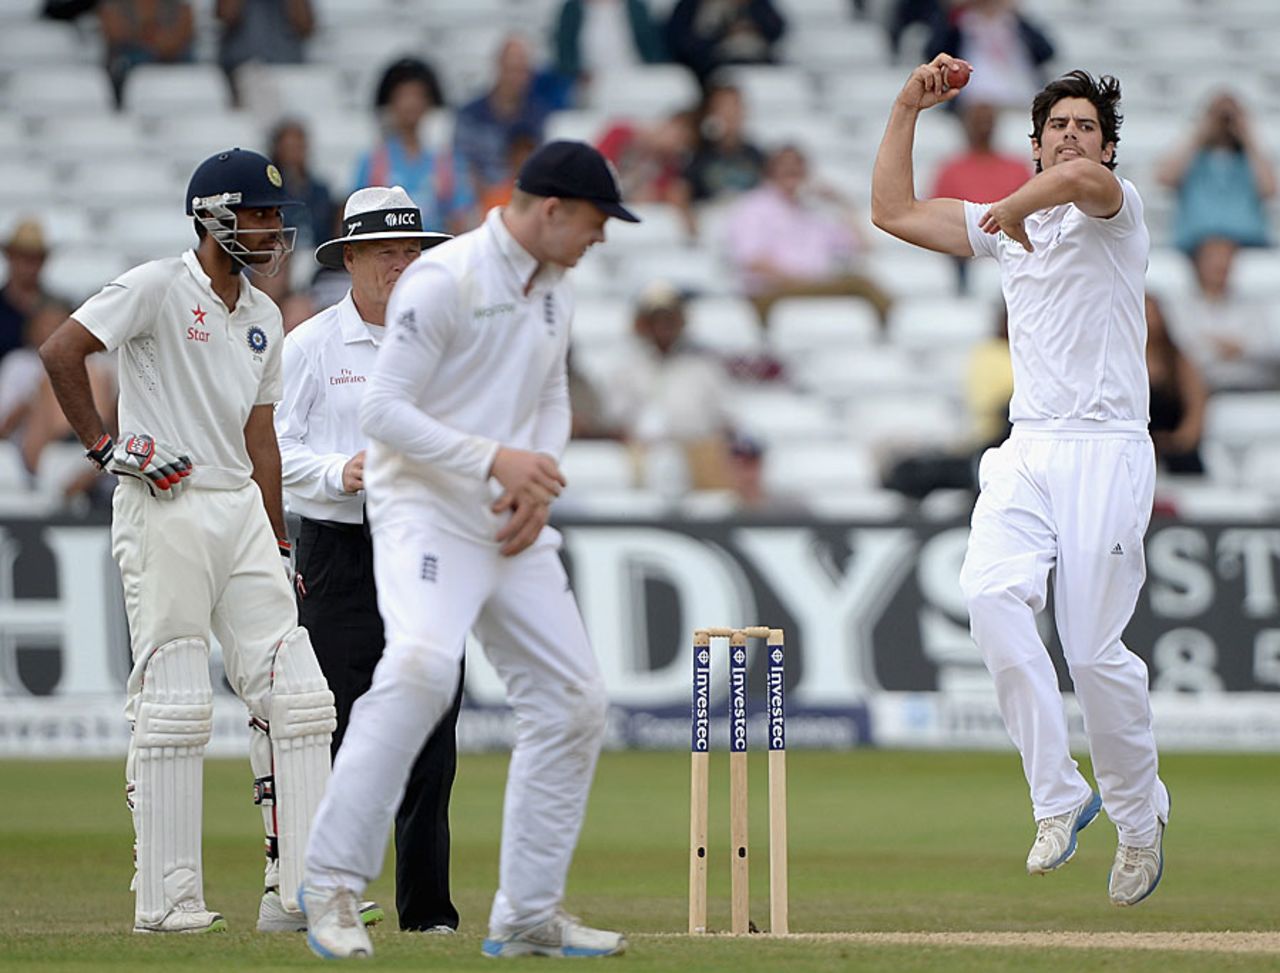 See it to believe it - Alastair Cook tries his hand at bowling, England v India, 1st Investec Test, Trent Bridge, 5th day, July 13, 2014